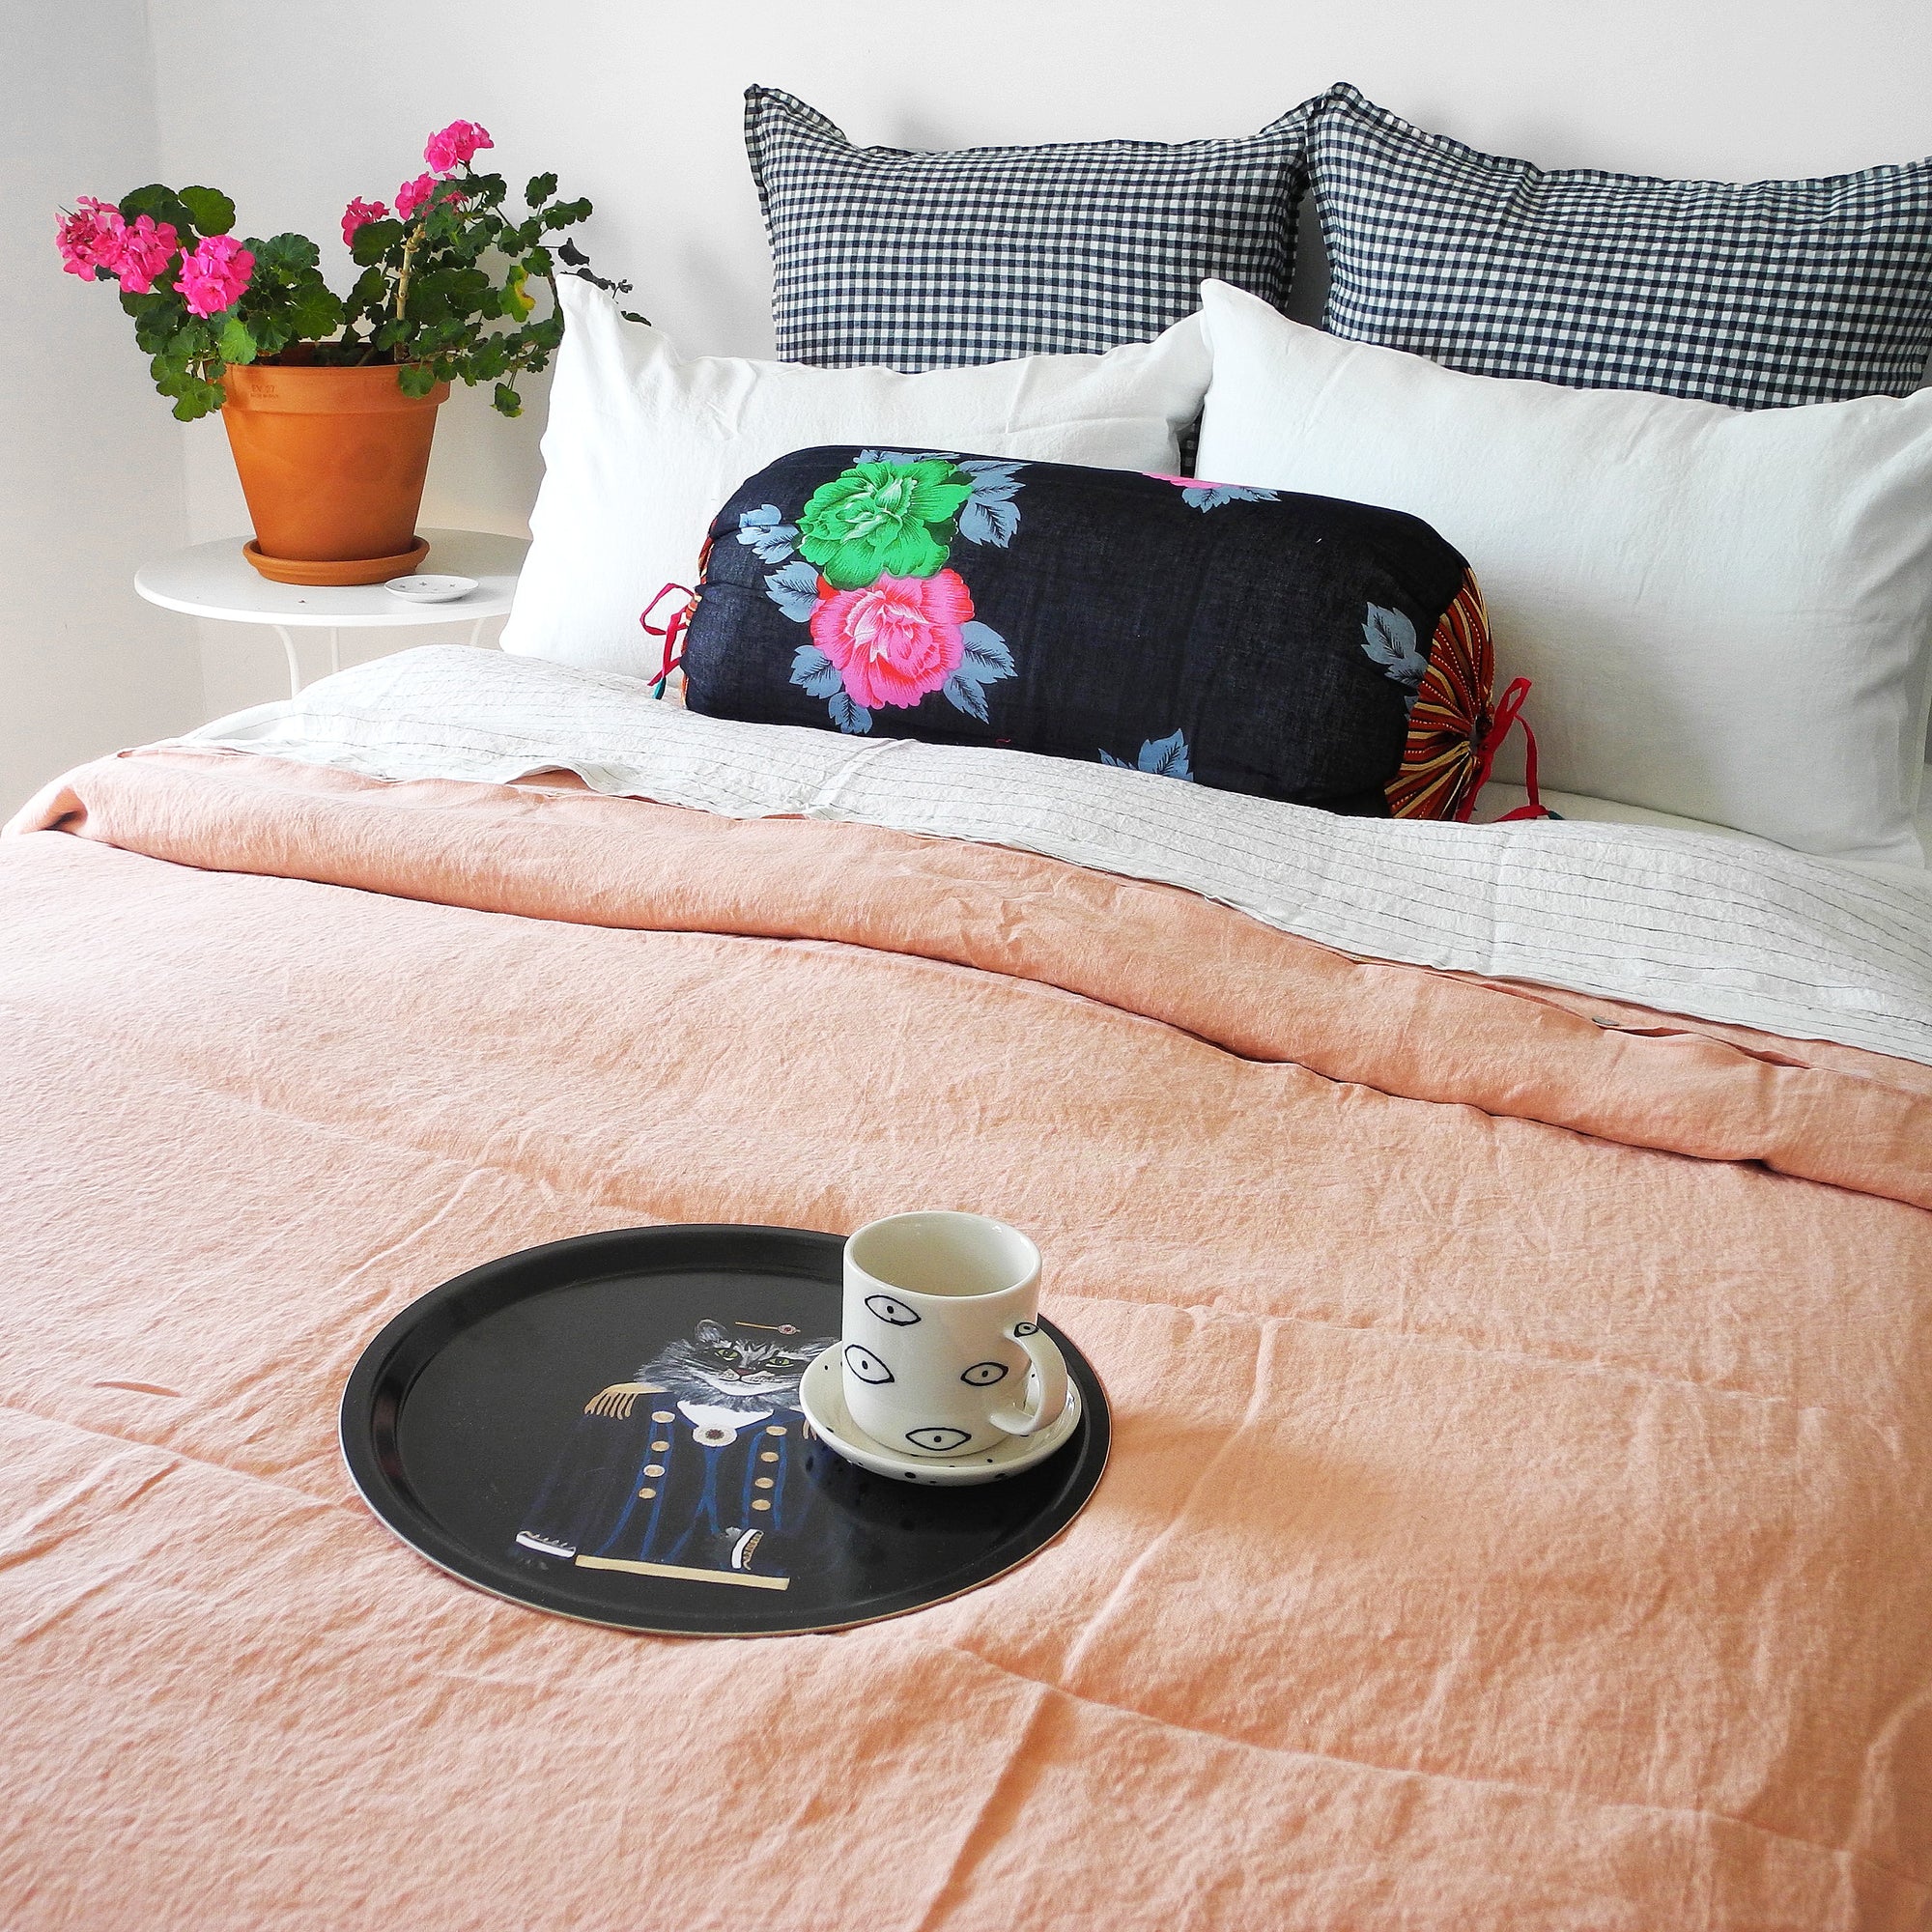 A Linge Particulier Linen Duvet in Copper gives a salmon and pink color to this duvet for a colorful linen bedding look from Collyer&#39;s Mansion